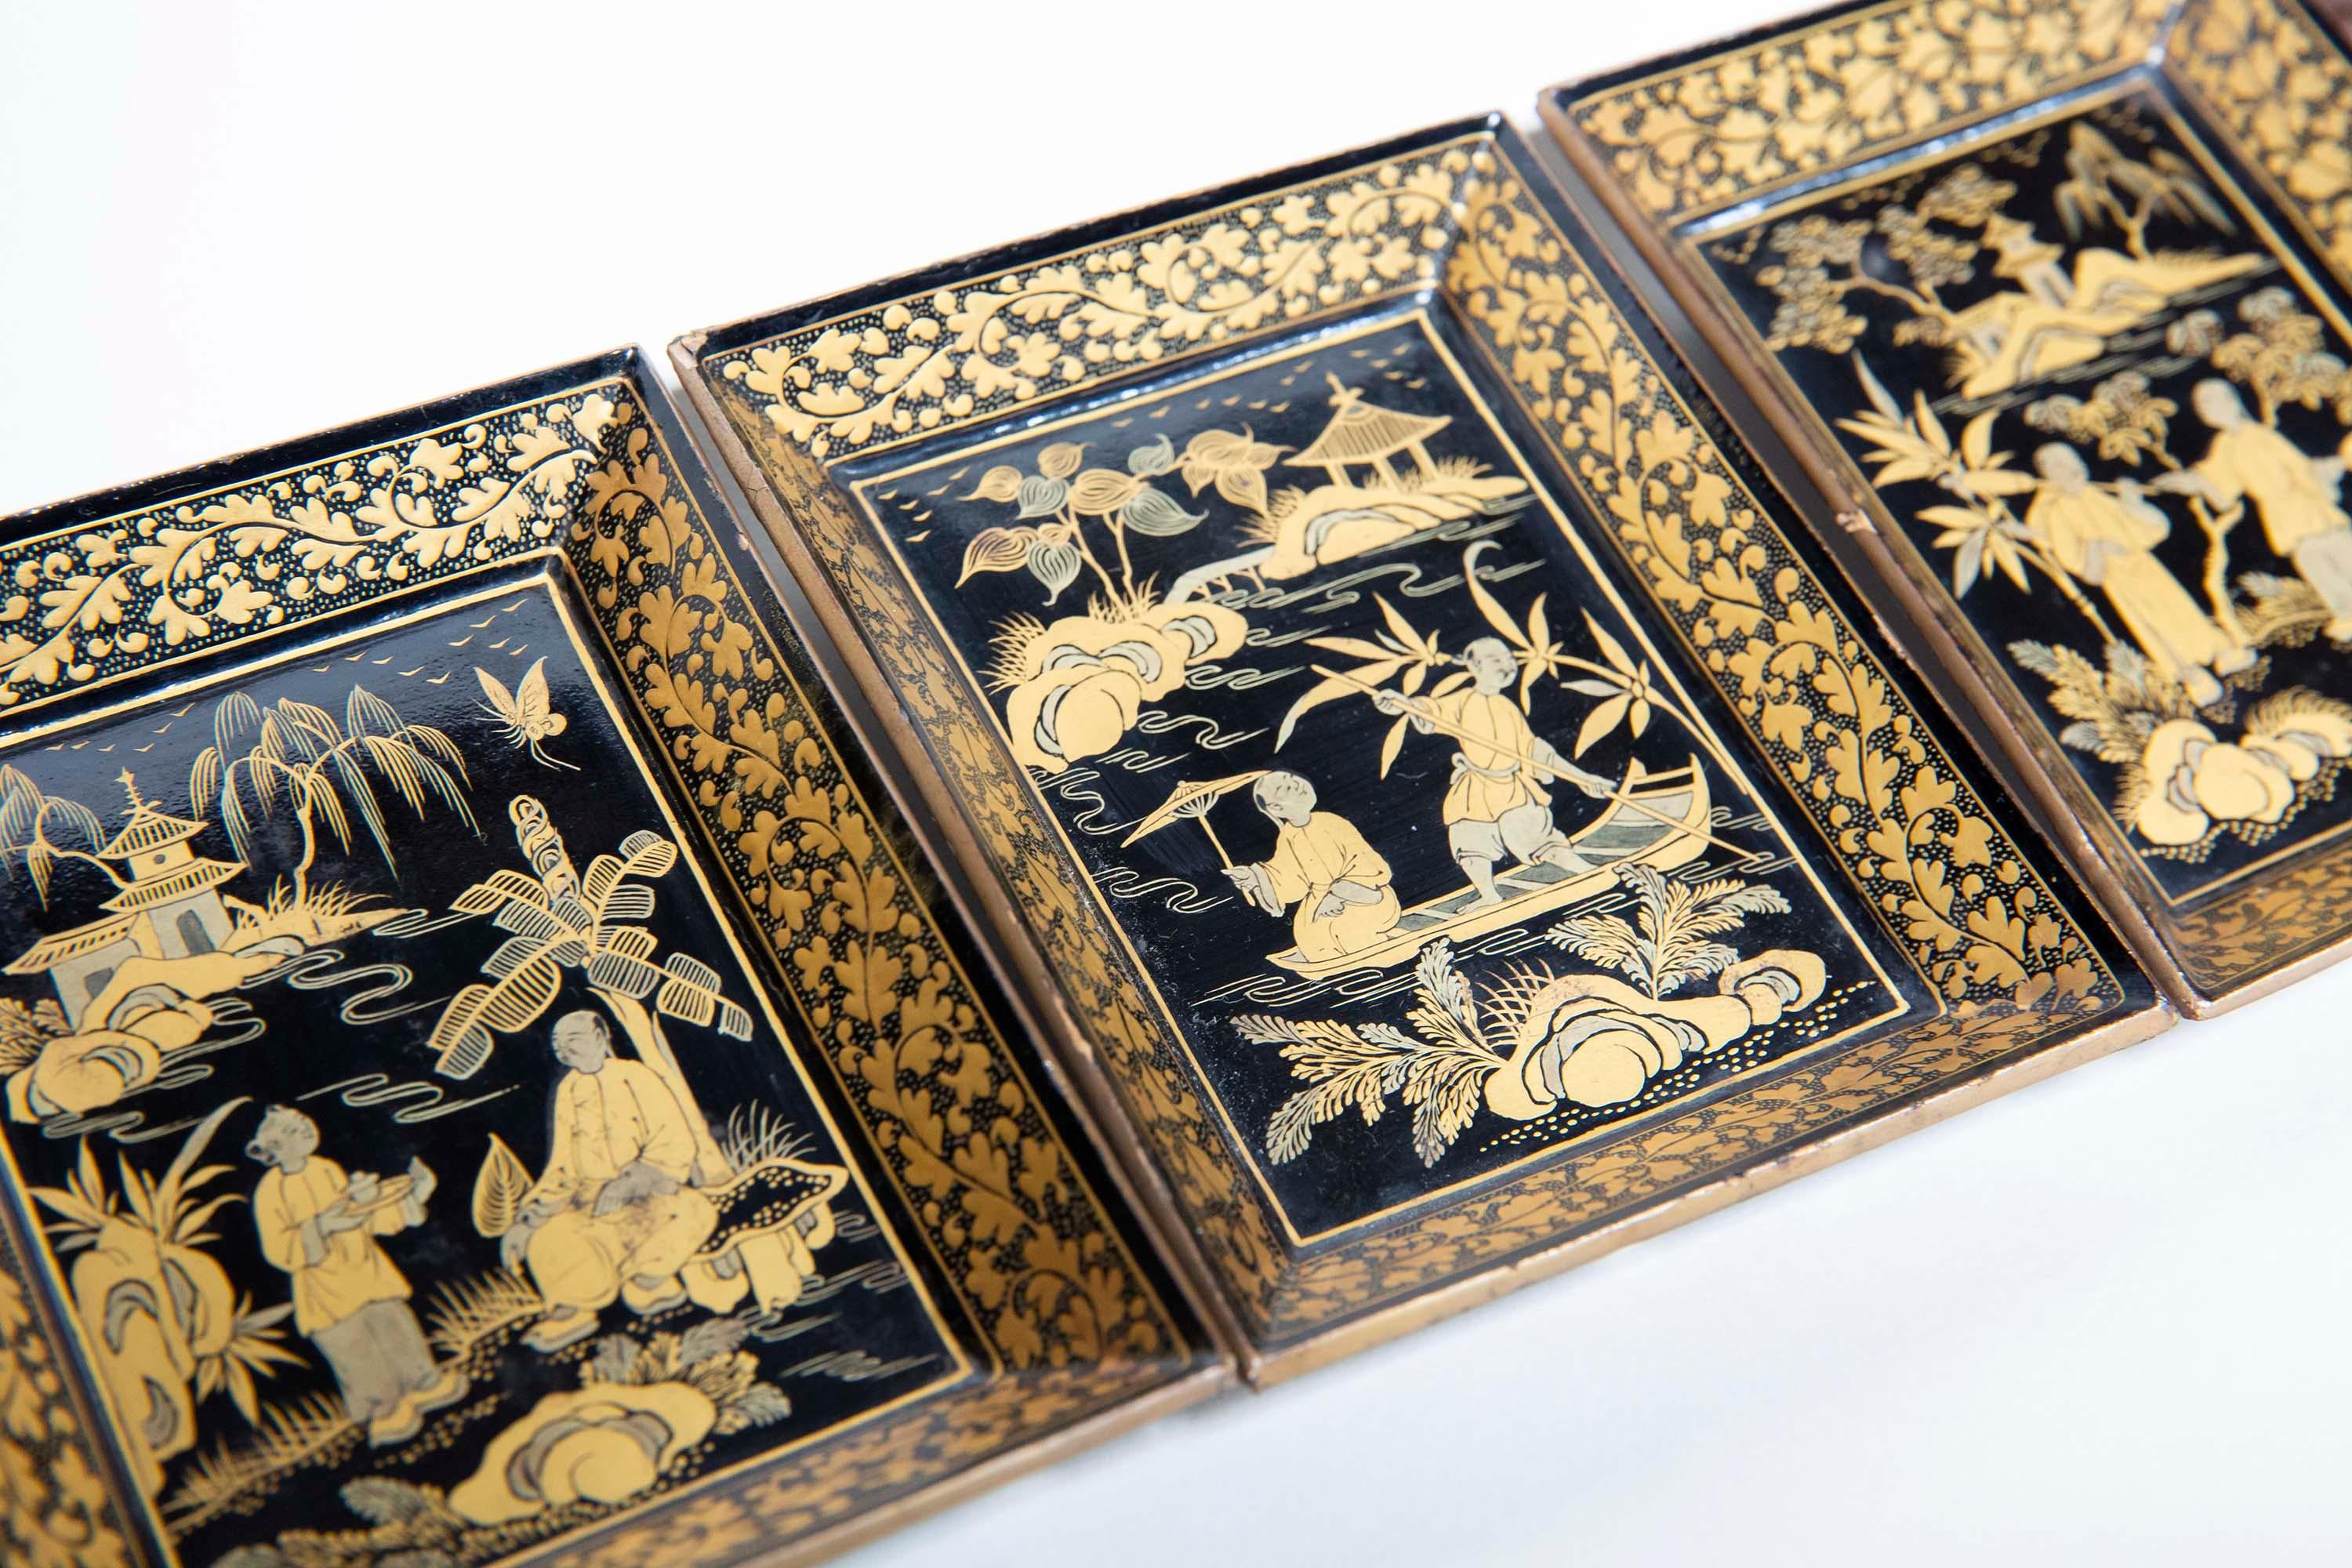 A set of three charming and decorative Chinese export black lacquer trays, exquisitely hand-decorated with chinoiserie motifs on gilt background within oriental foliate borders.
China, Canton, Qing dynasty, 19th century.

Why we like them
Charming